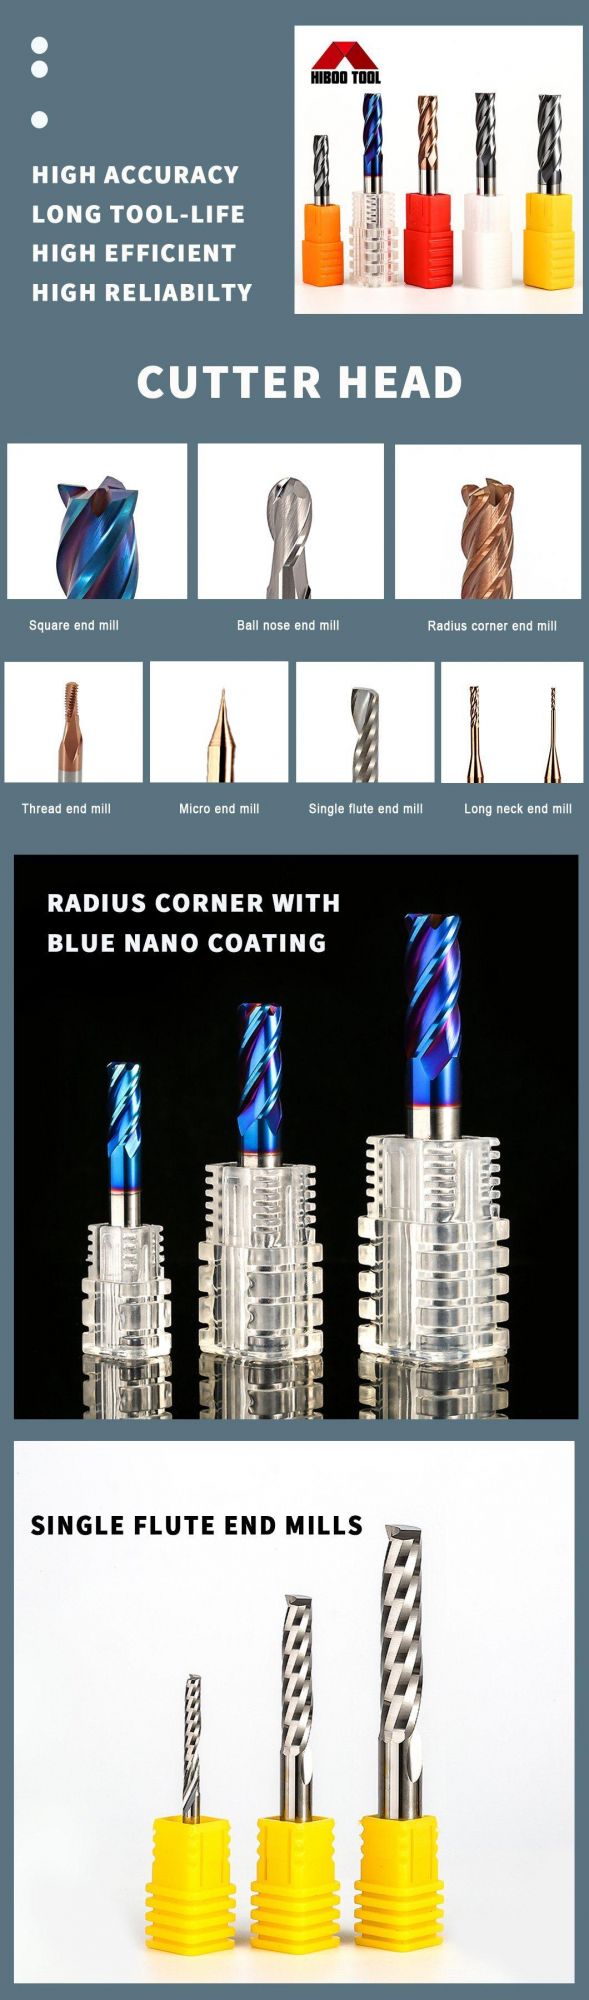 Two Flutes HRC55 Good Quality Micro End Mill